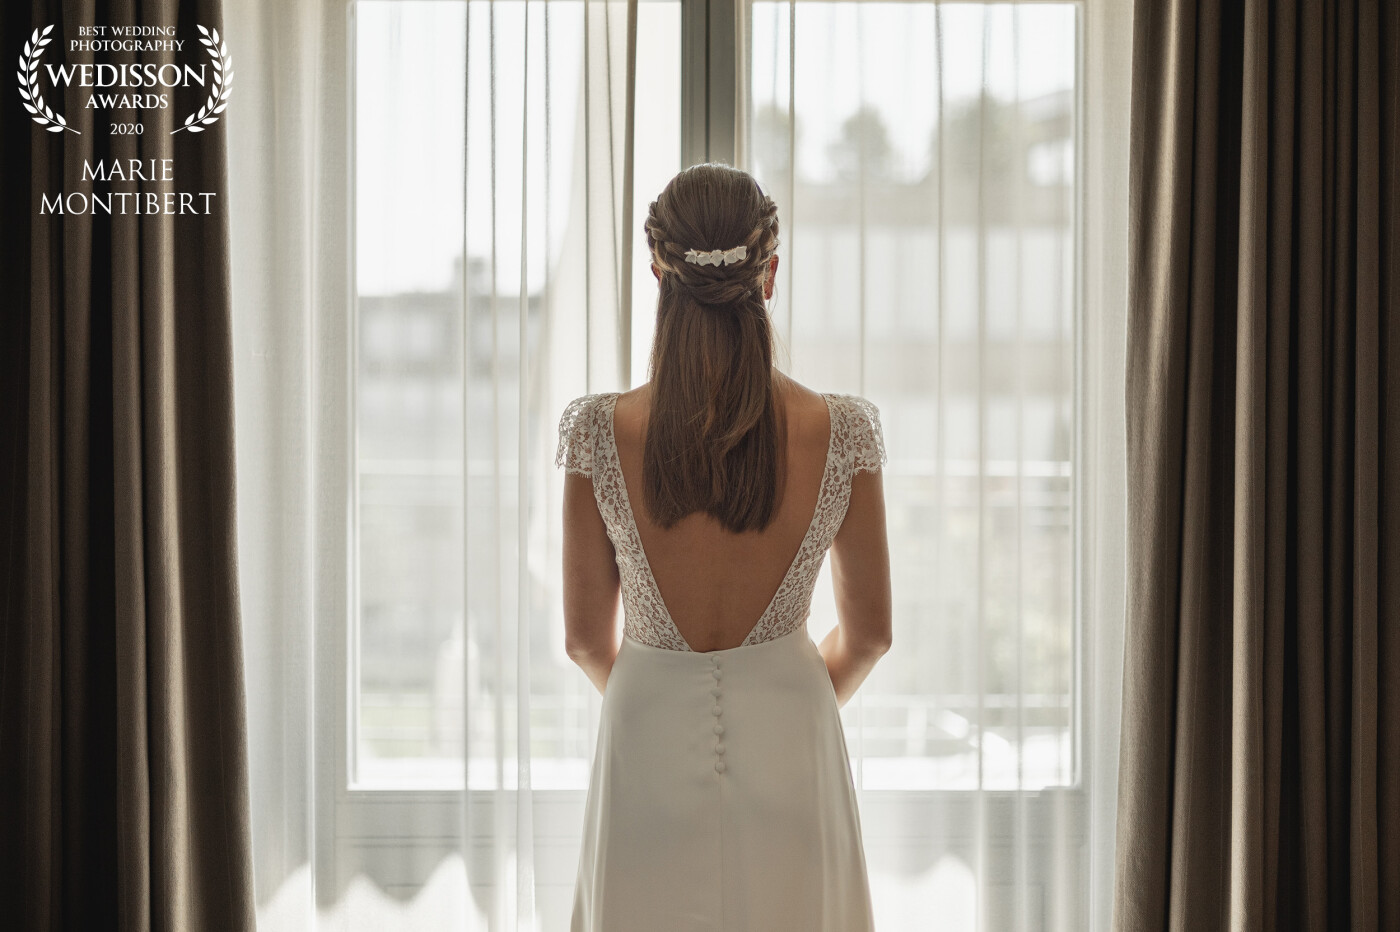 After getting ready, I always take time for a quick shoot of the bride and the groom - separately - before we lead the ceremony. We take this time to breathe. to feel this time. to feel the coming moment. To let go off the stress. To feel light and ready for this intense moment.